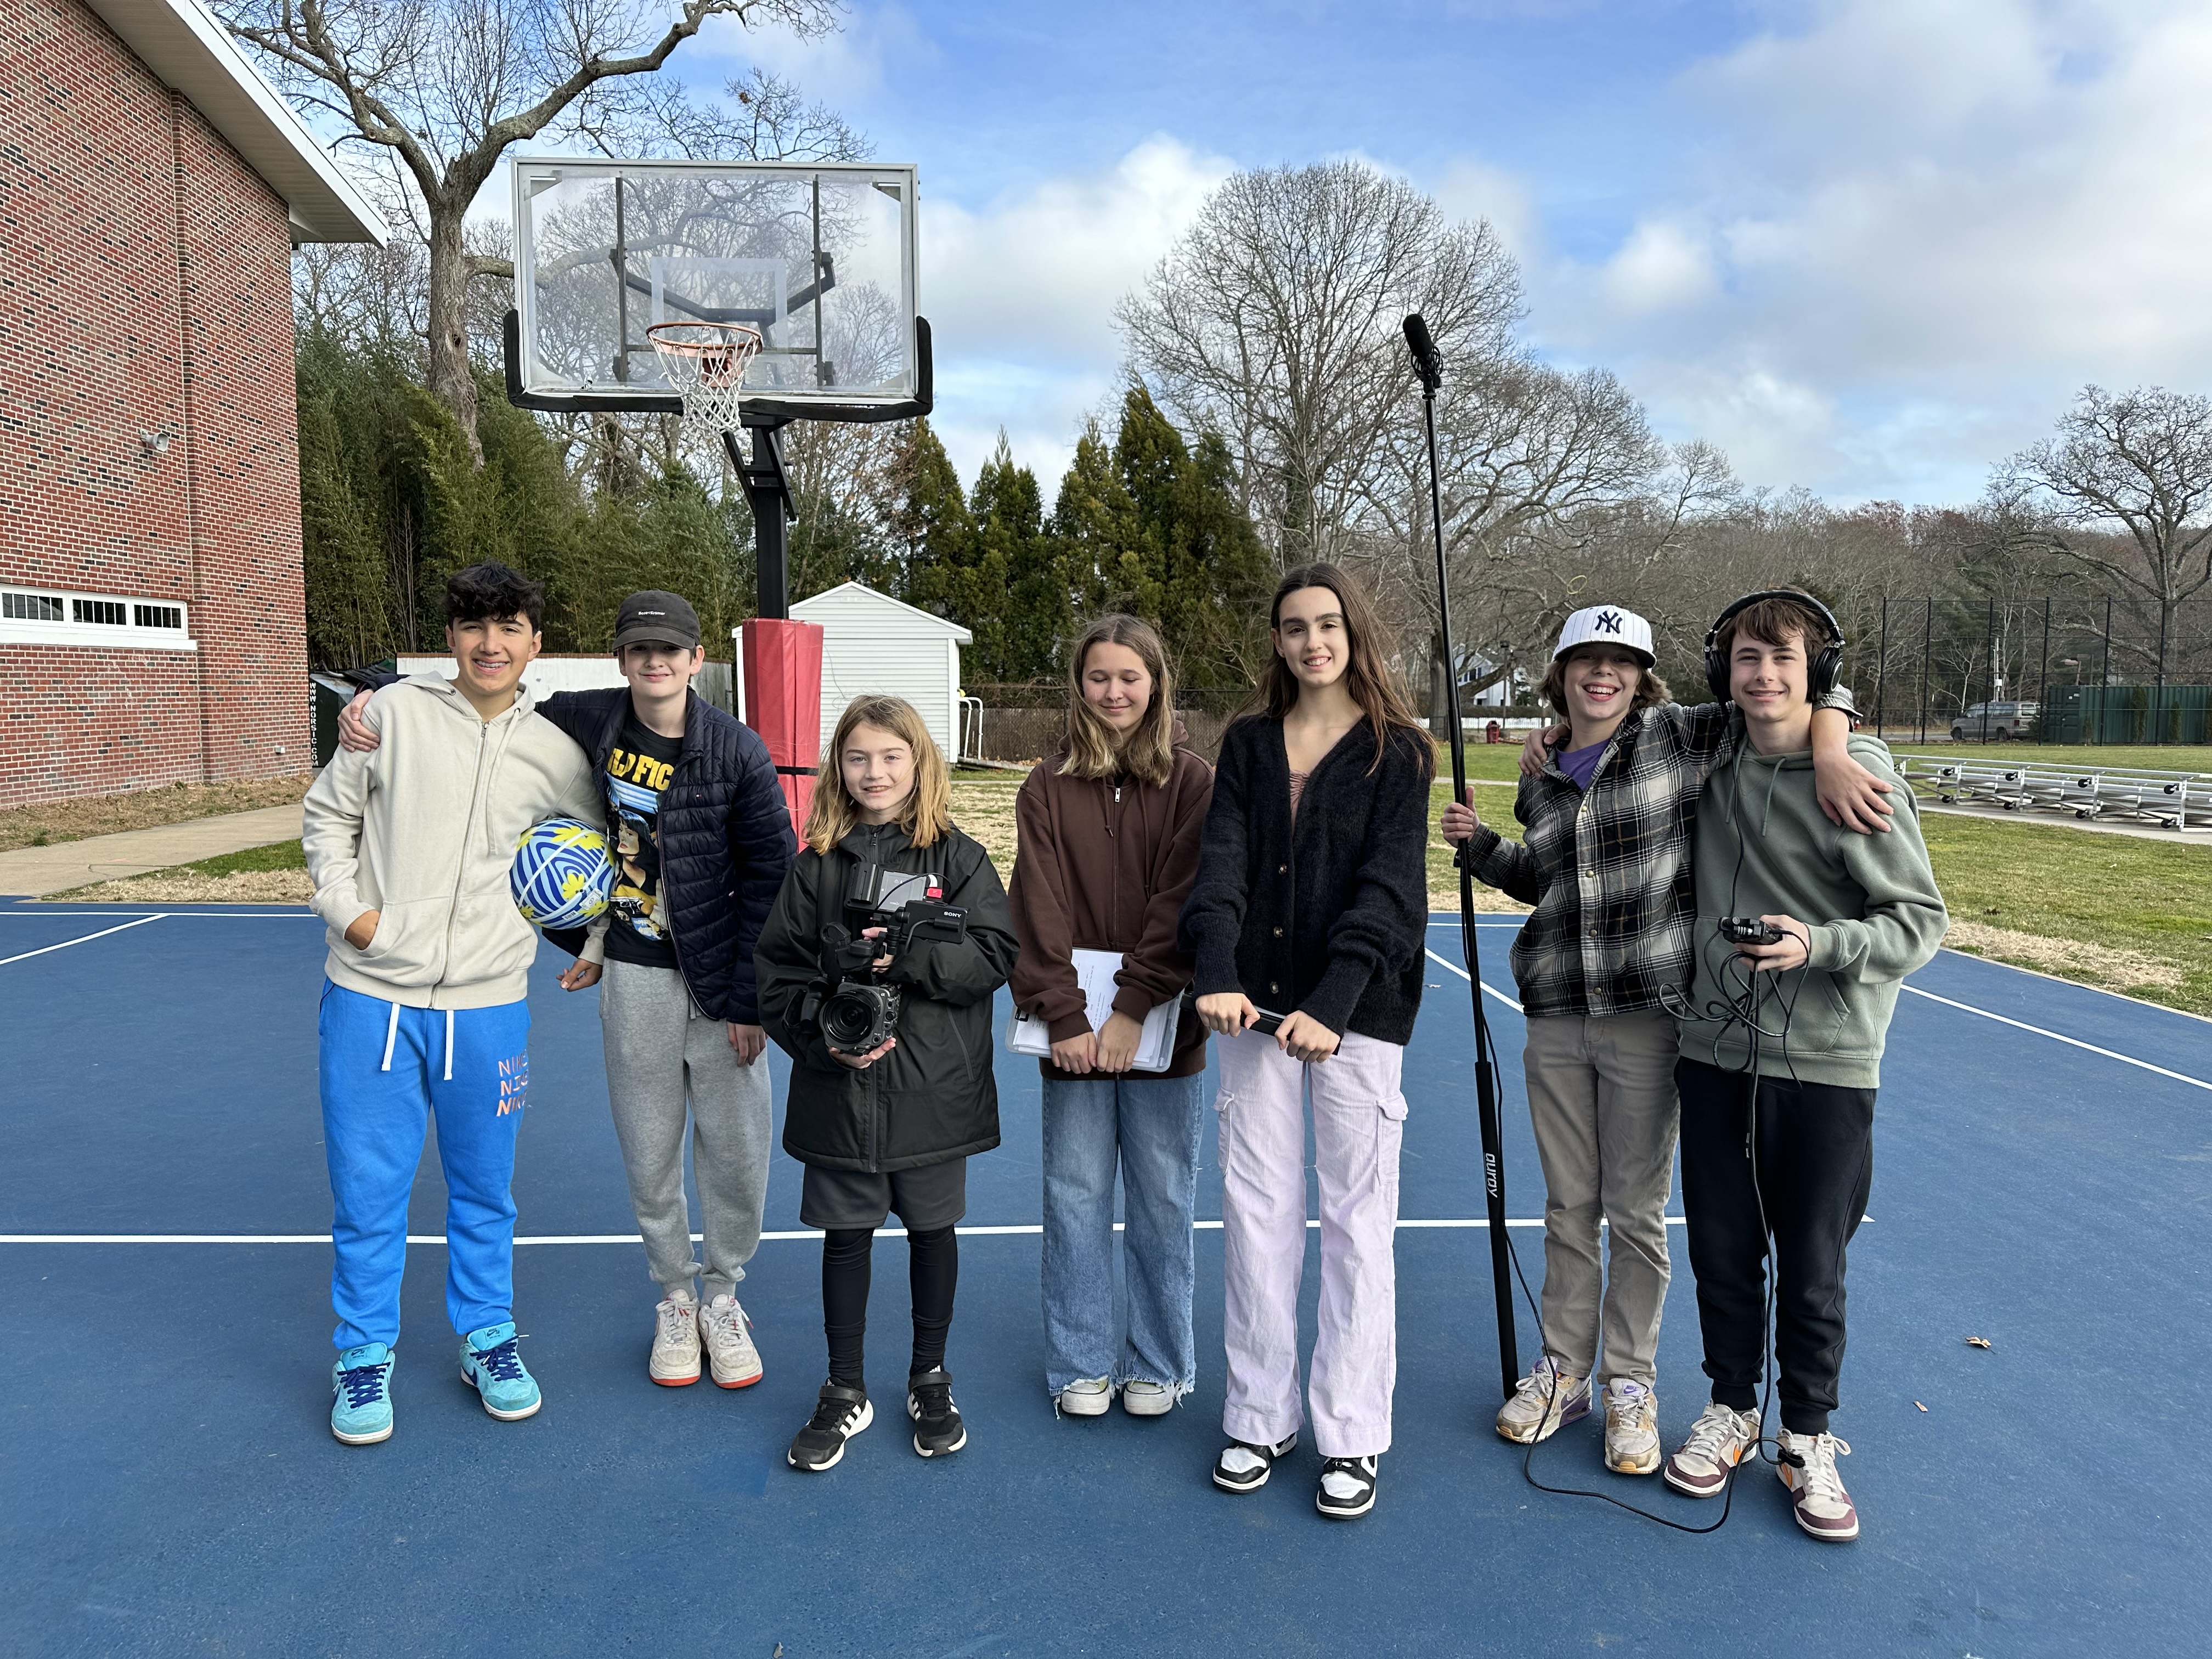 on the set of their new film "Slam Dunk Shenanigans!"